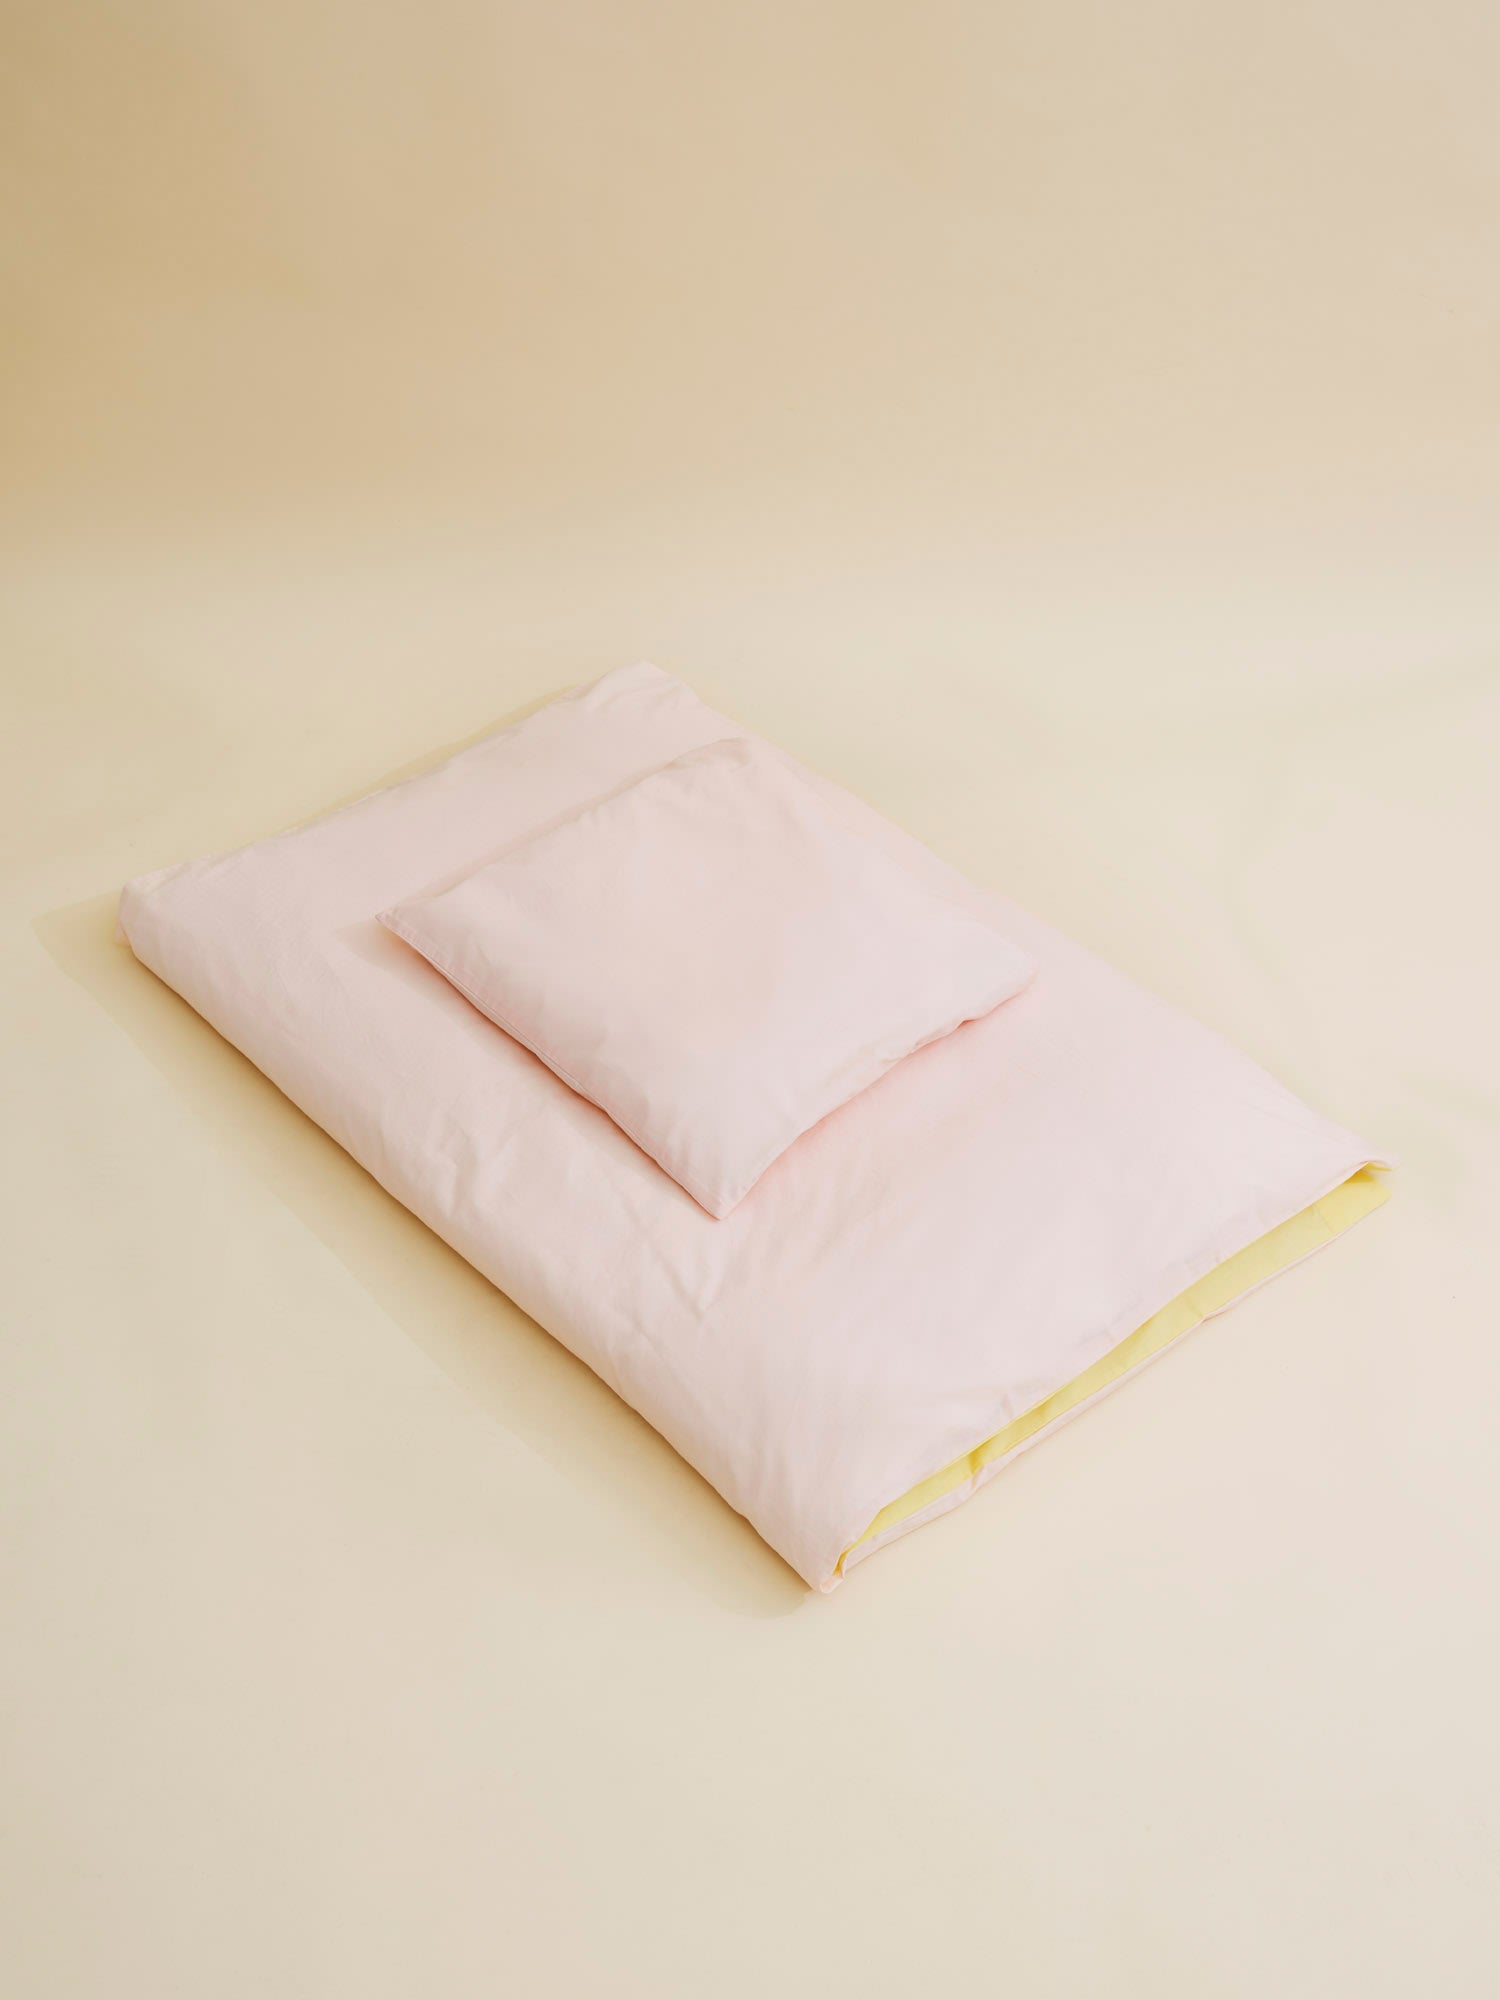 FUTURE BABY BED LINEN 110*125/35*55 (SE)* - SOFT PINK/ LT. YELLOW